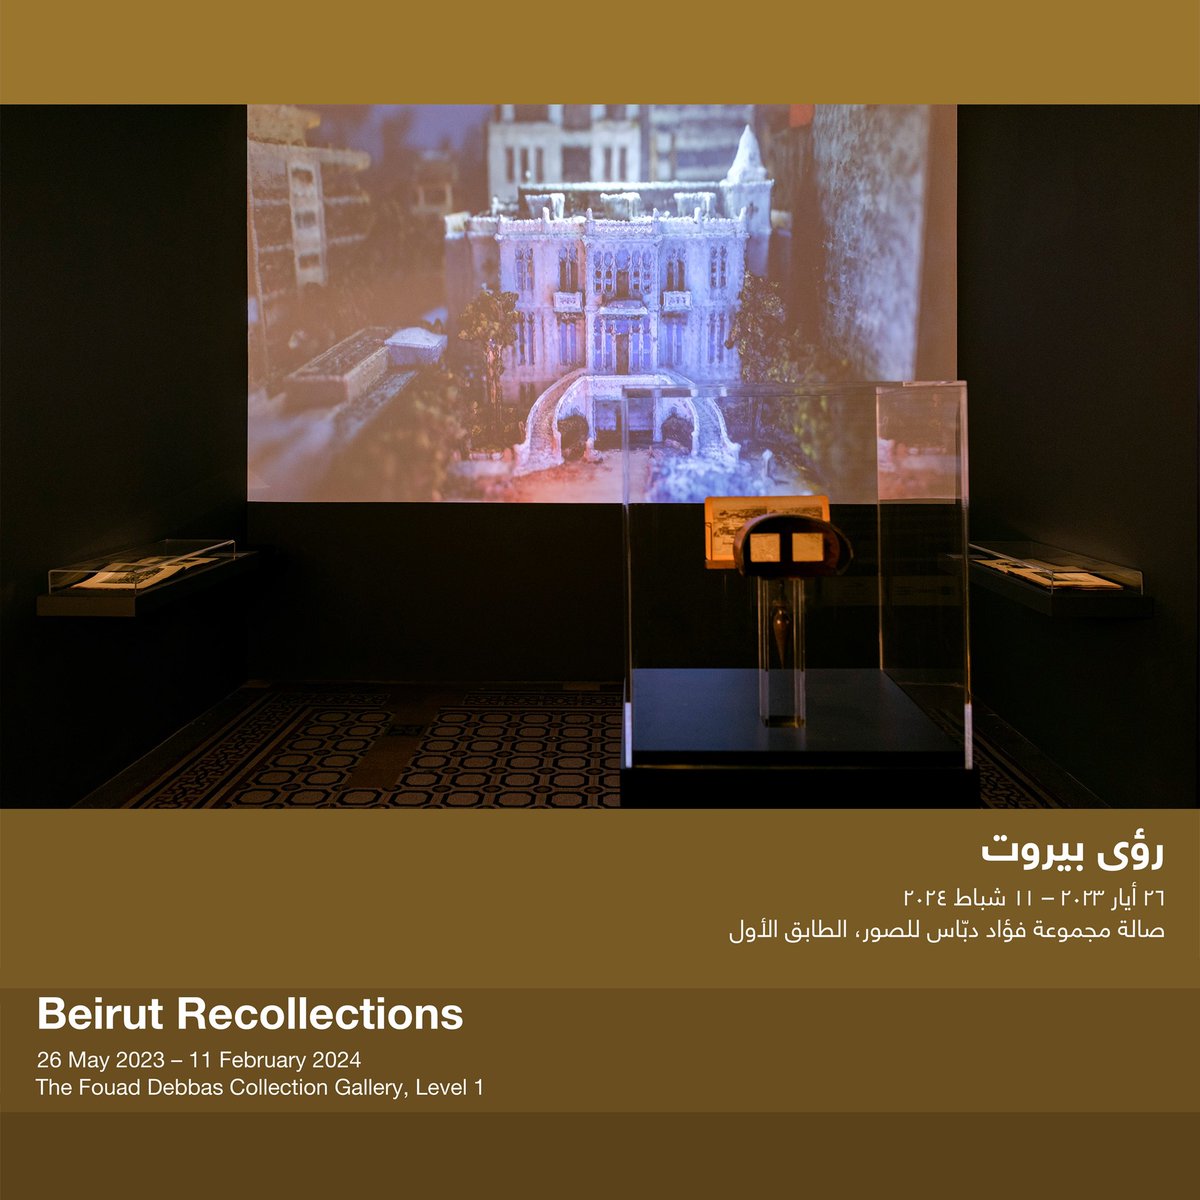 and discover treasured memories in Beirut Recollections Featuring a digital video by ICONEM